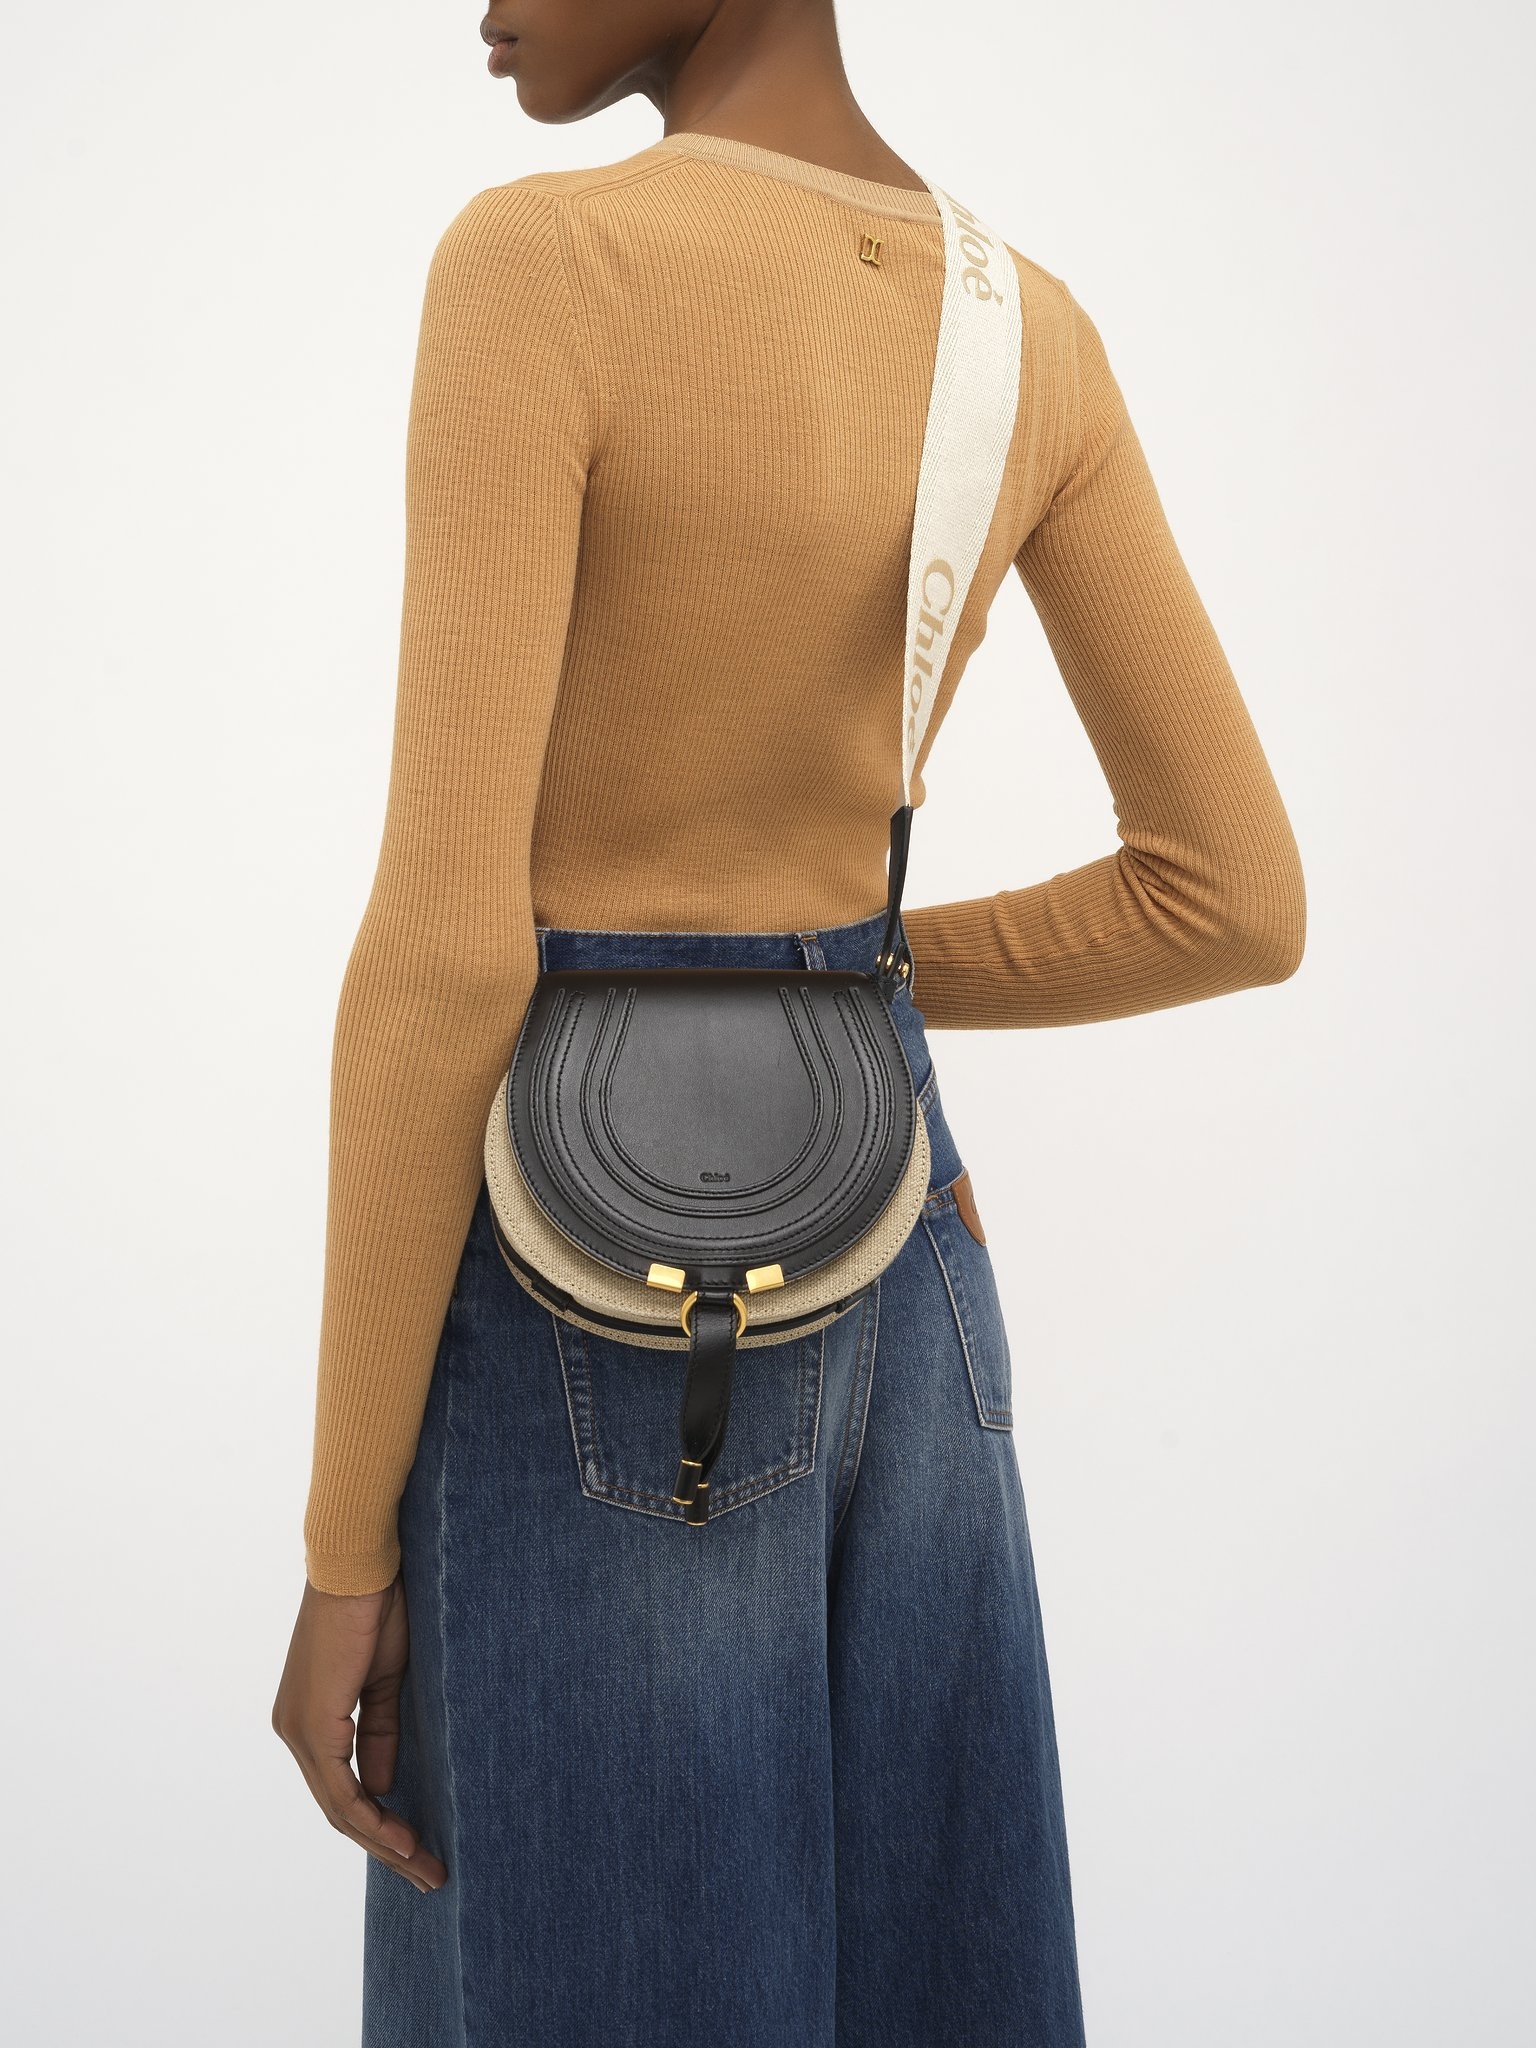 SMALL MARCIE SADDLE BAG IN LINEN & SMOOTH LEATHER - 2